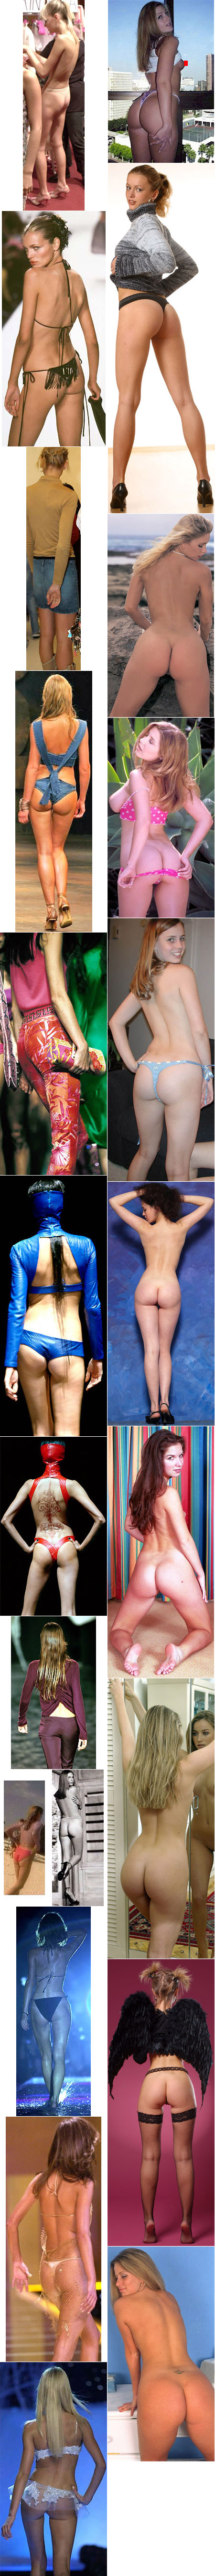 The backside of high-fashion models contrasted with that of feminine glamour models.